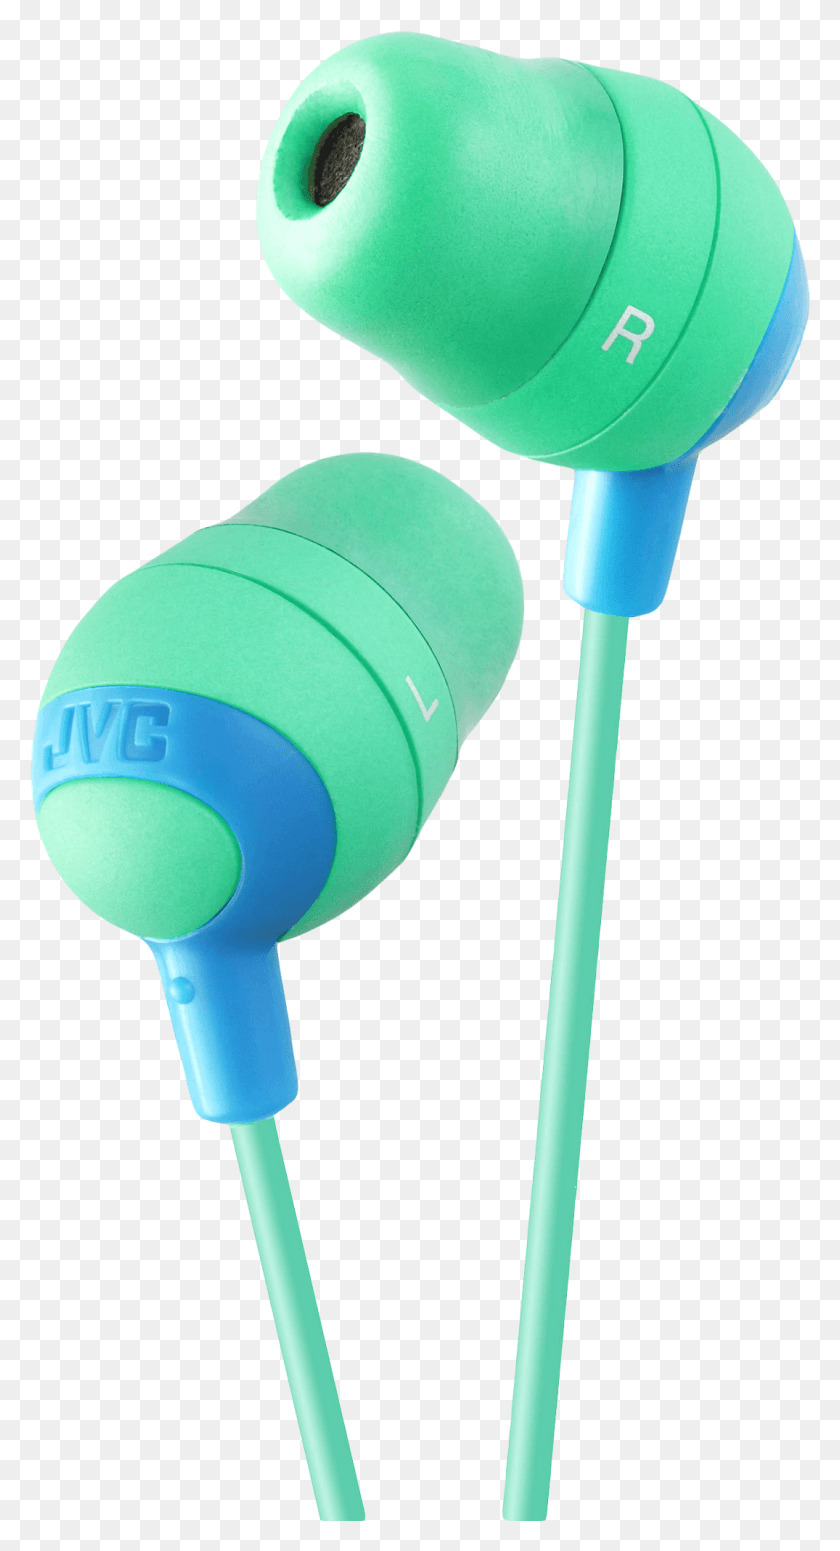 1075x2055 Auriculares Png / Auriculares Hd Png